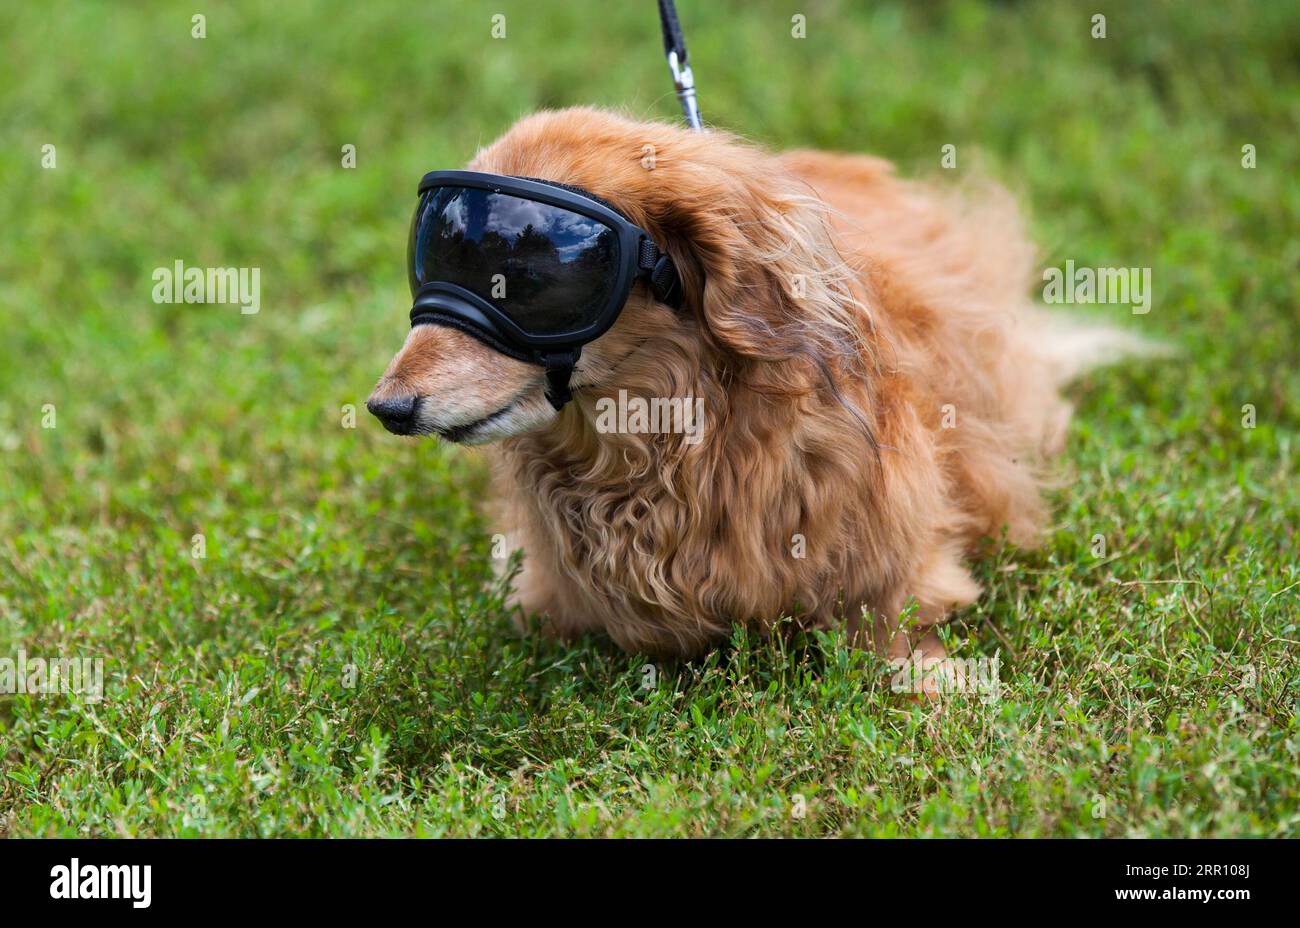 200831 -- BEIJING, Aug. 31, 2020 -- A pet dog wearing goggles poses for photos during the 2020 Party 4 Paws event in a park in Toronto, Canada, on Aug. 30, 2020. Photo by /Xinhua XINHUA PHOTOS OF THE DAY ZouxZheng PUBLICATIONxNOTxINxCHN Stock Photo